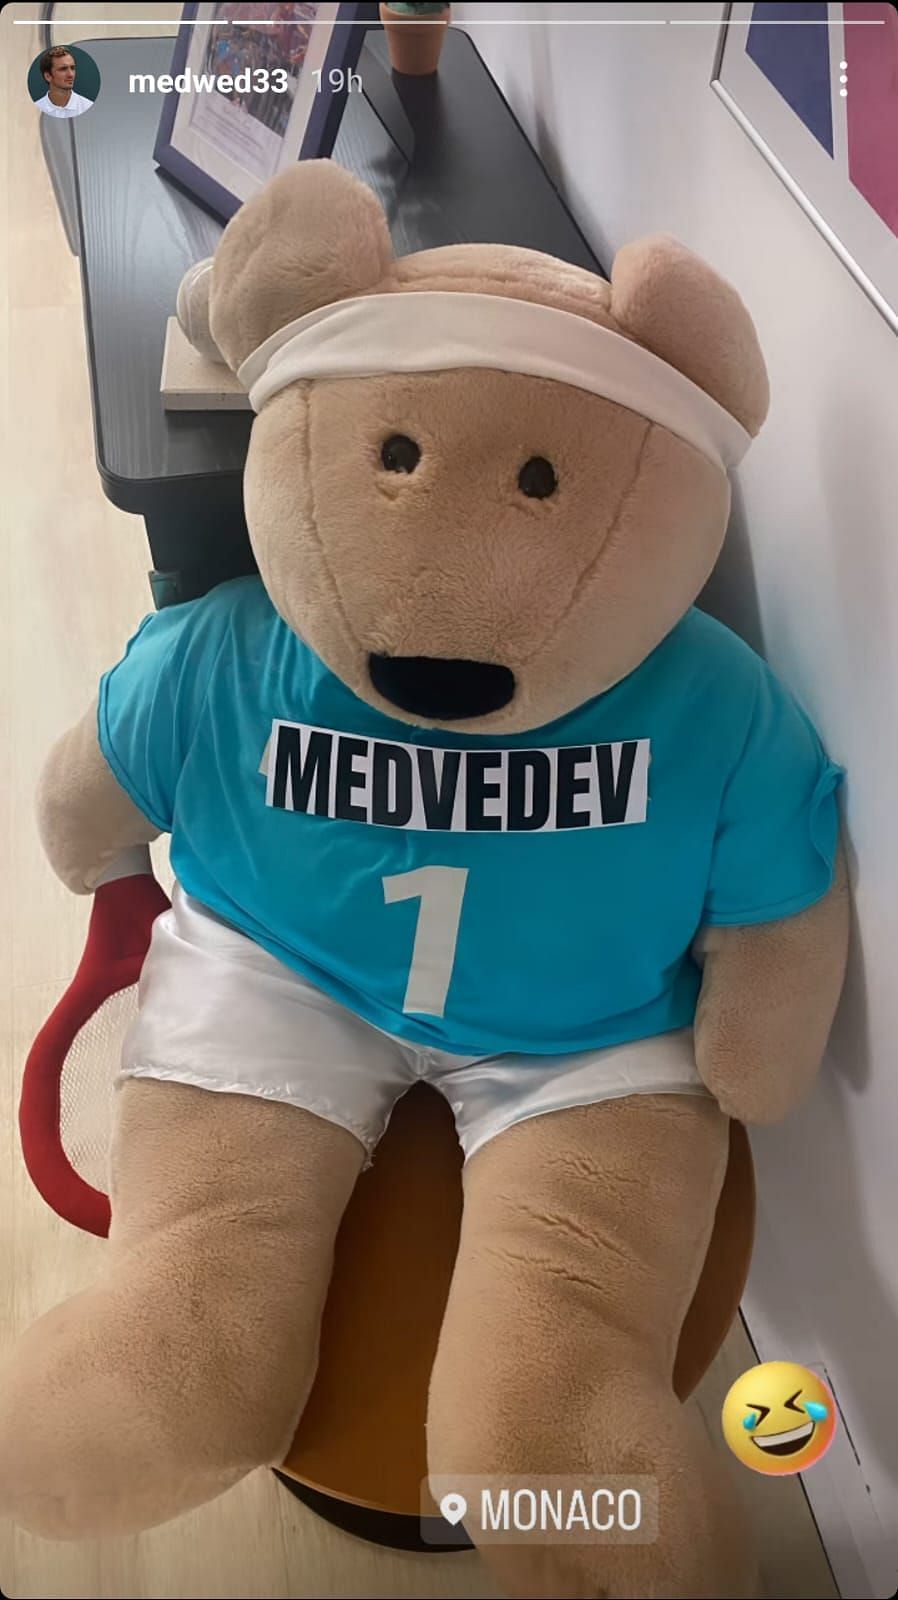 The stuffed animal wearing a t-shirt with Medvedev&#039;s name and ranking on it